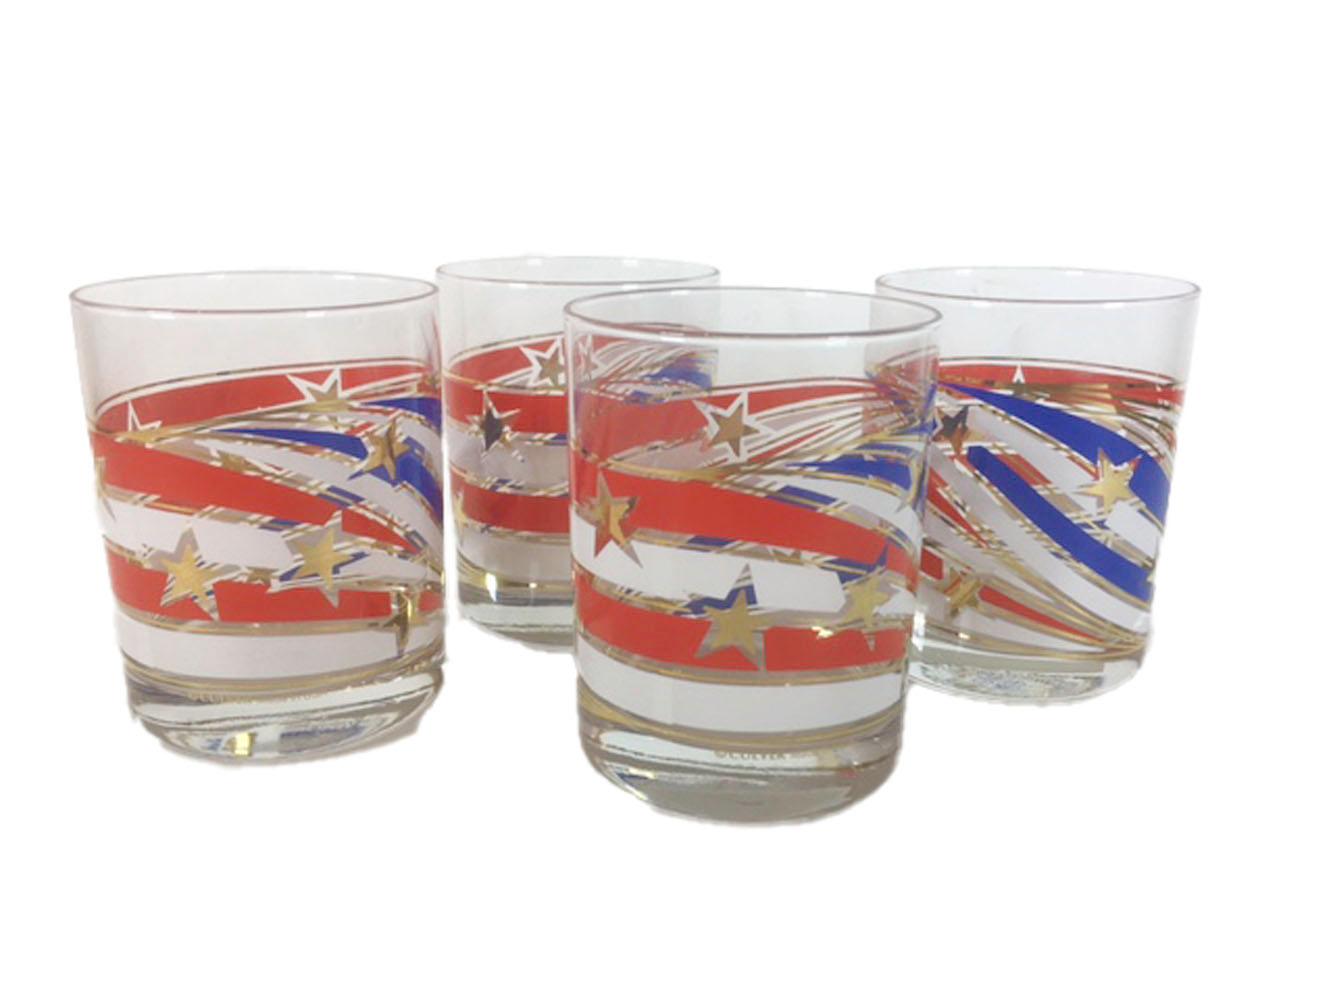 Set of 4 culver rocks glasses with spiral red, white and blue bands divided by lines of gold and with gold stars superimposed throughout creating a celebratory overall pattern.